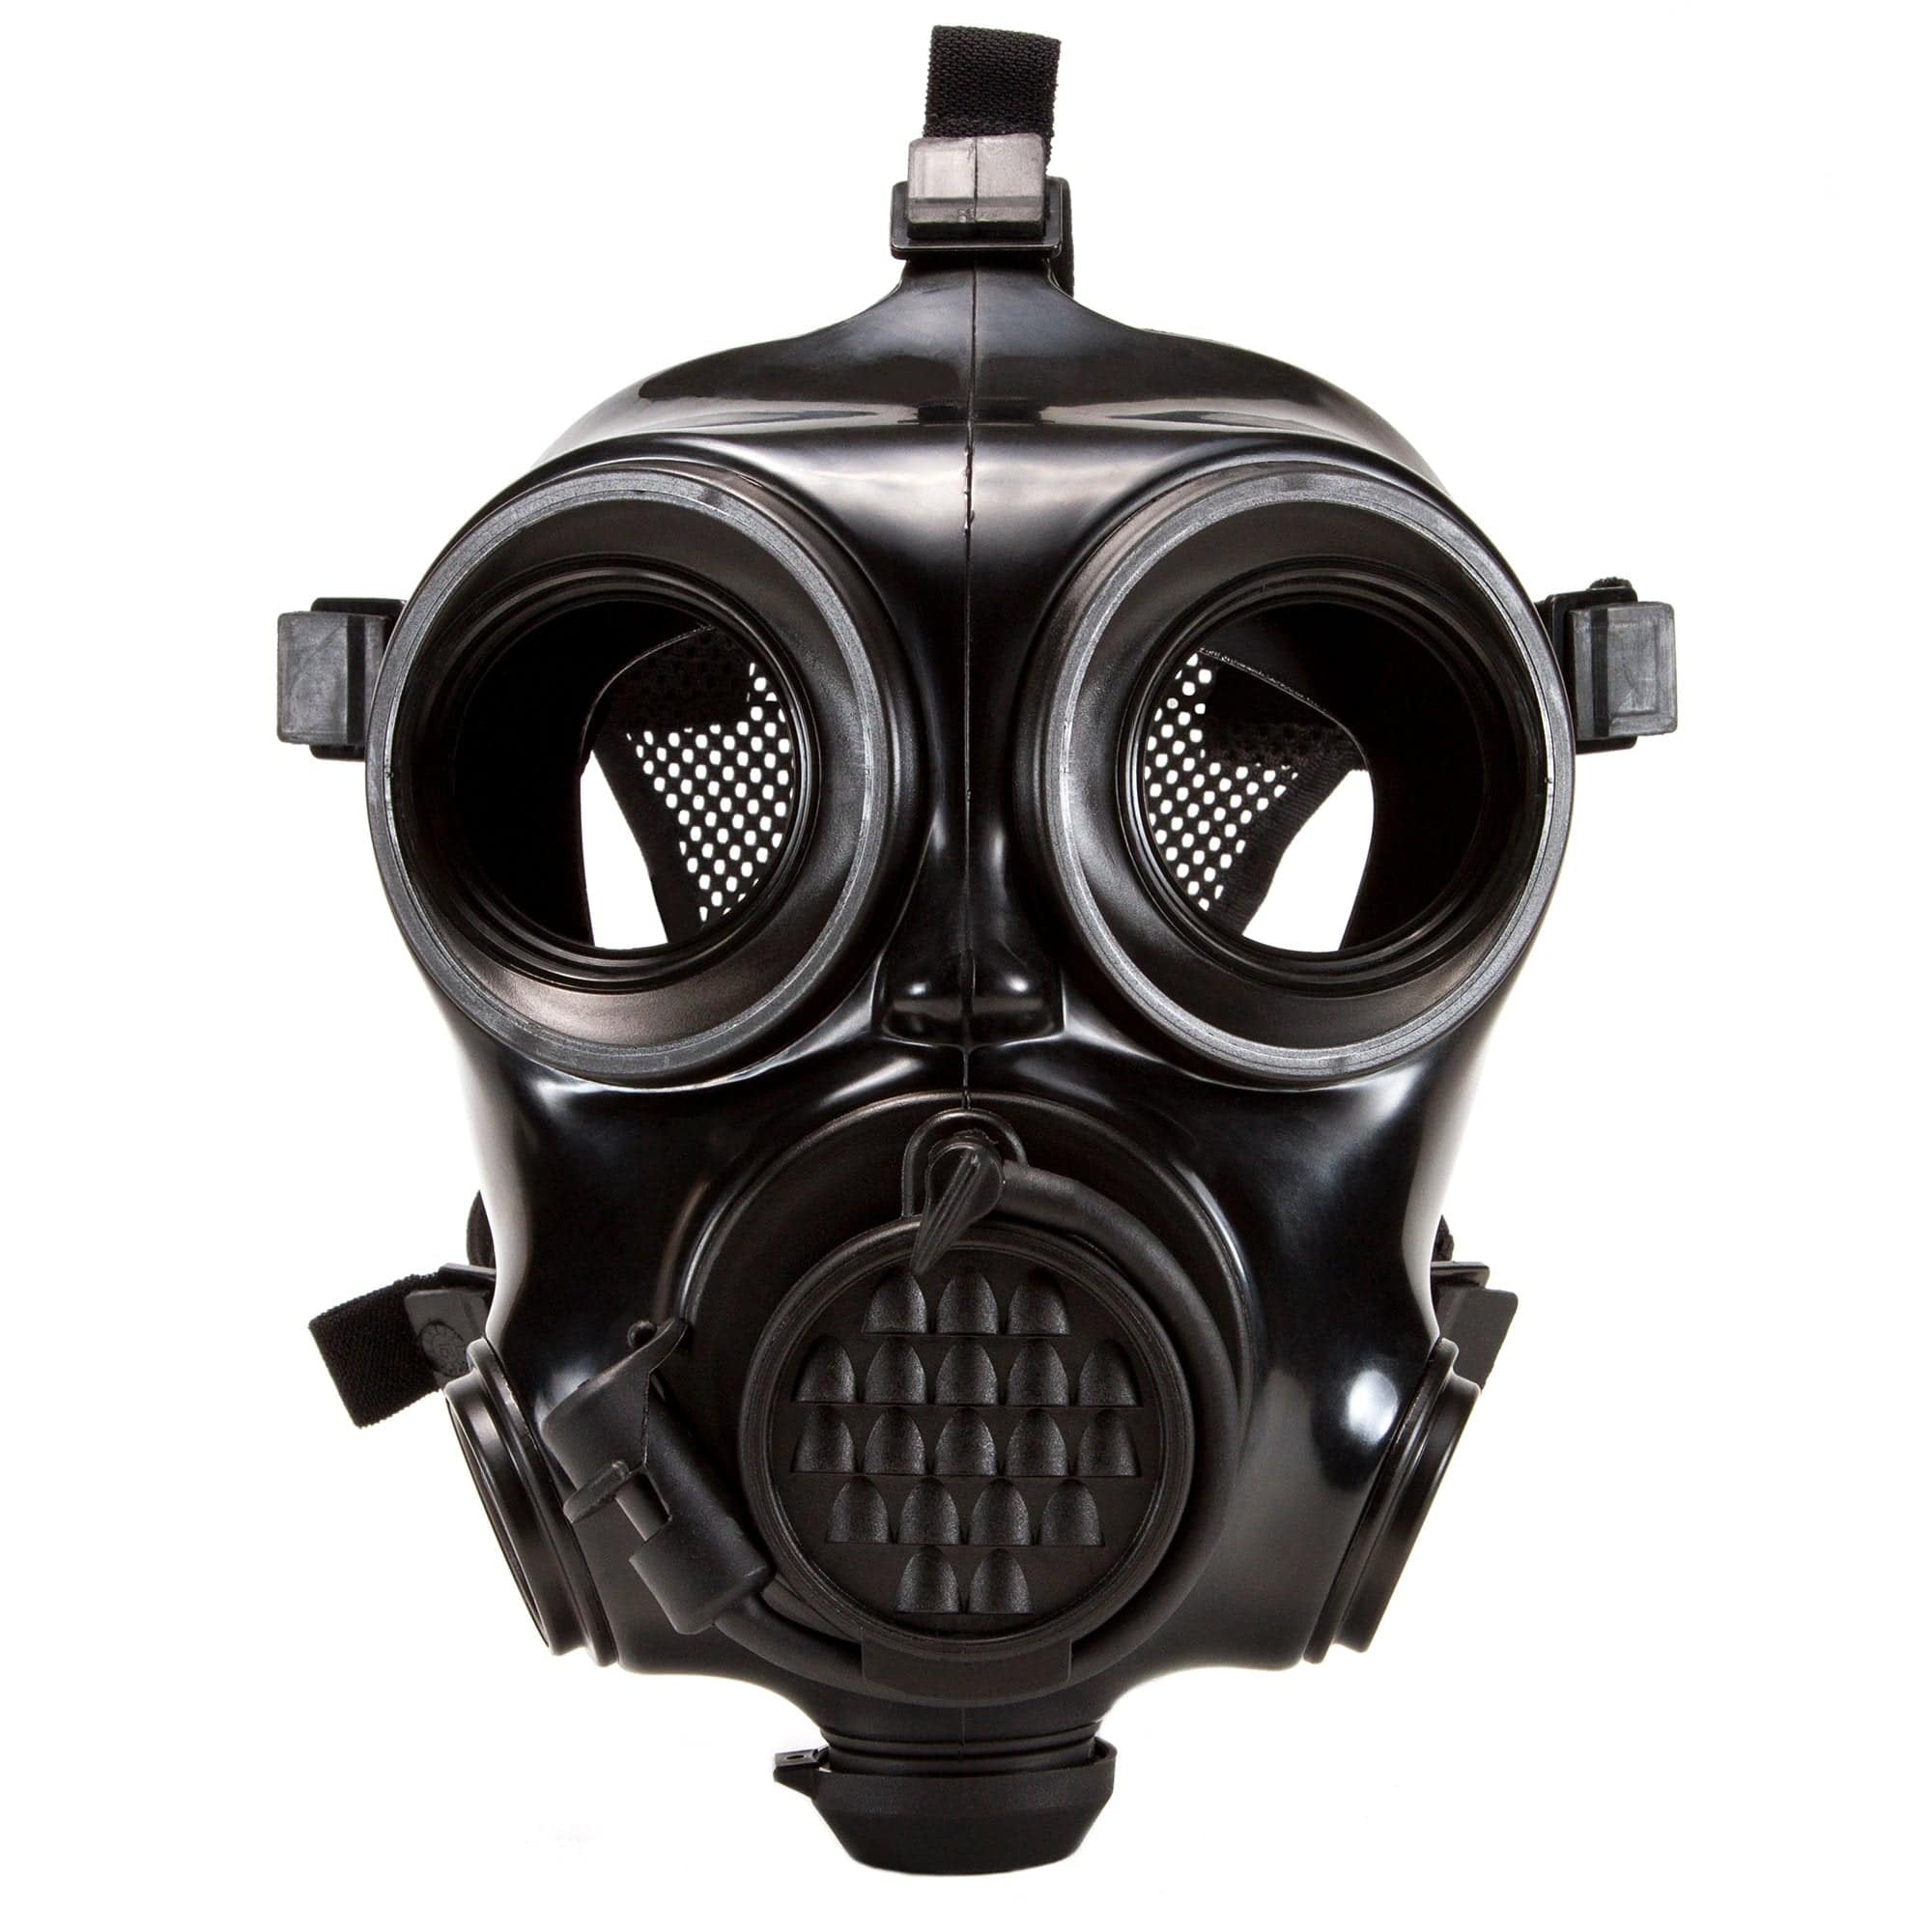 Gas Masks Survival Nuclear and Chemical, Gas Mask with 40mm Activated  Carbon Filter, Tactical Full Face Respirator Mask for Chemicals, Gases,  Paint